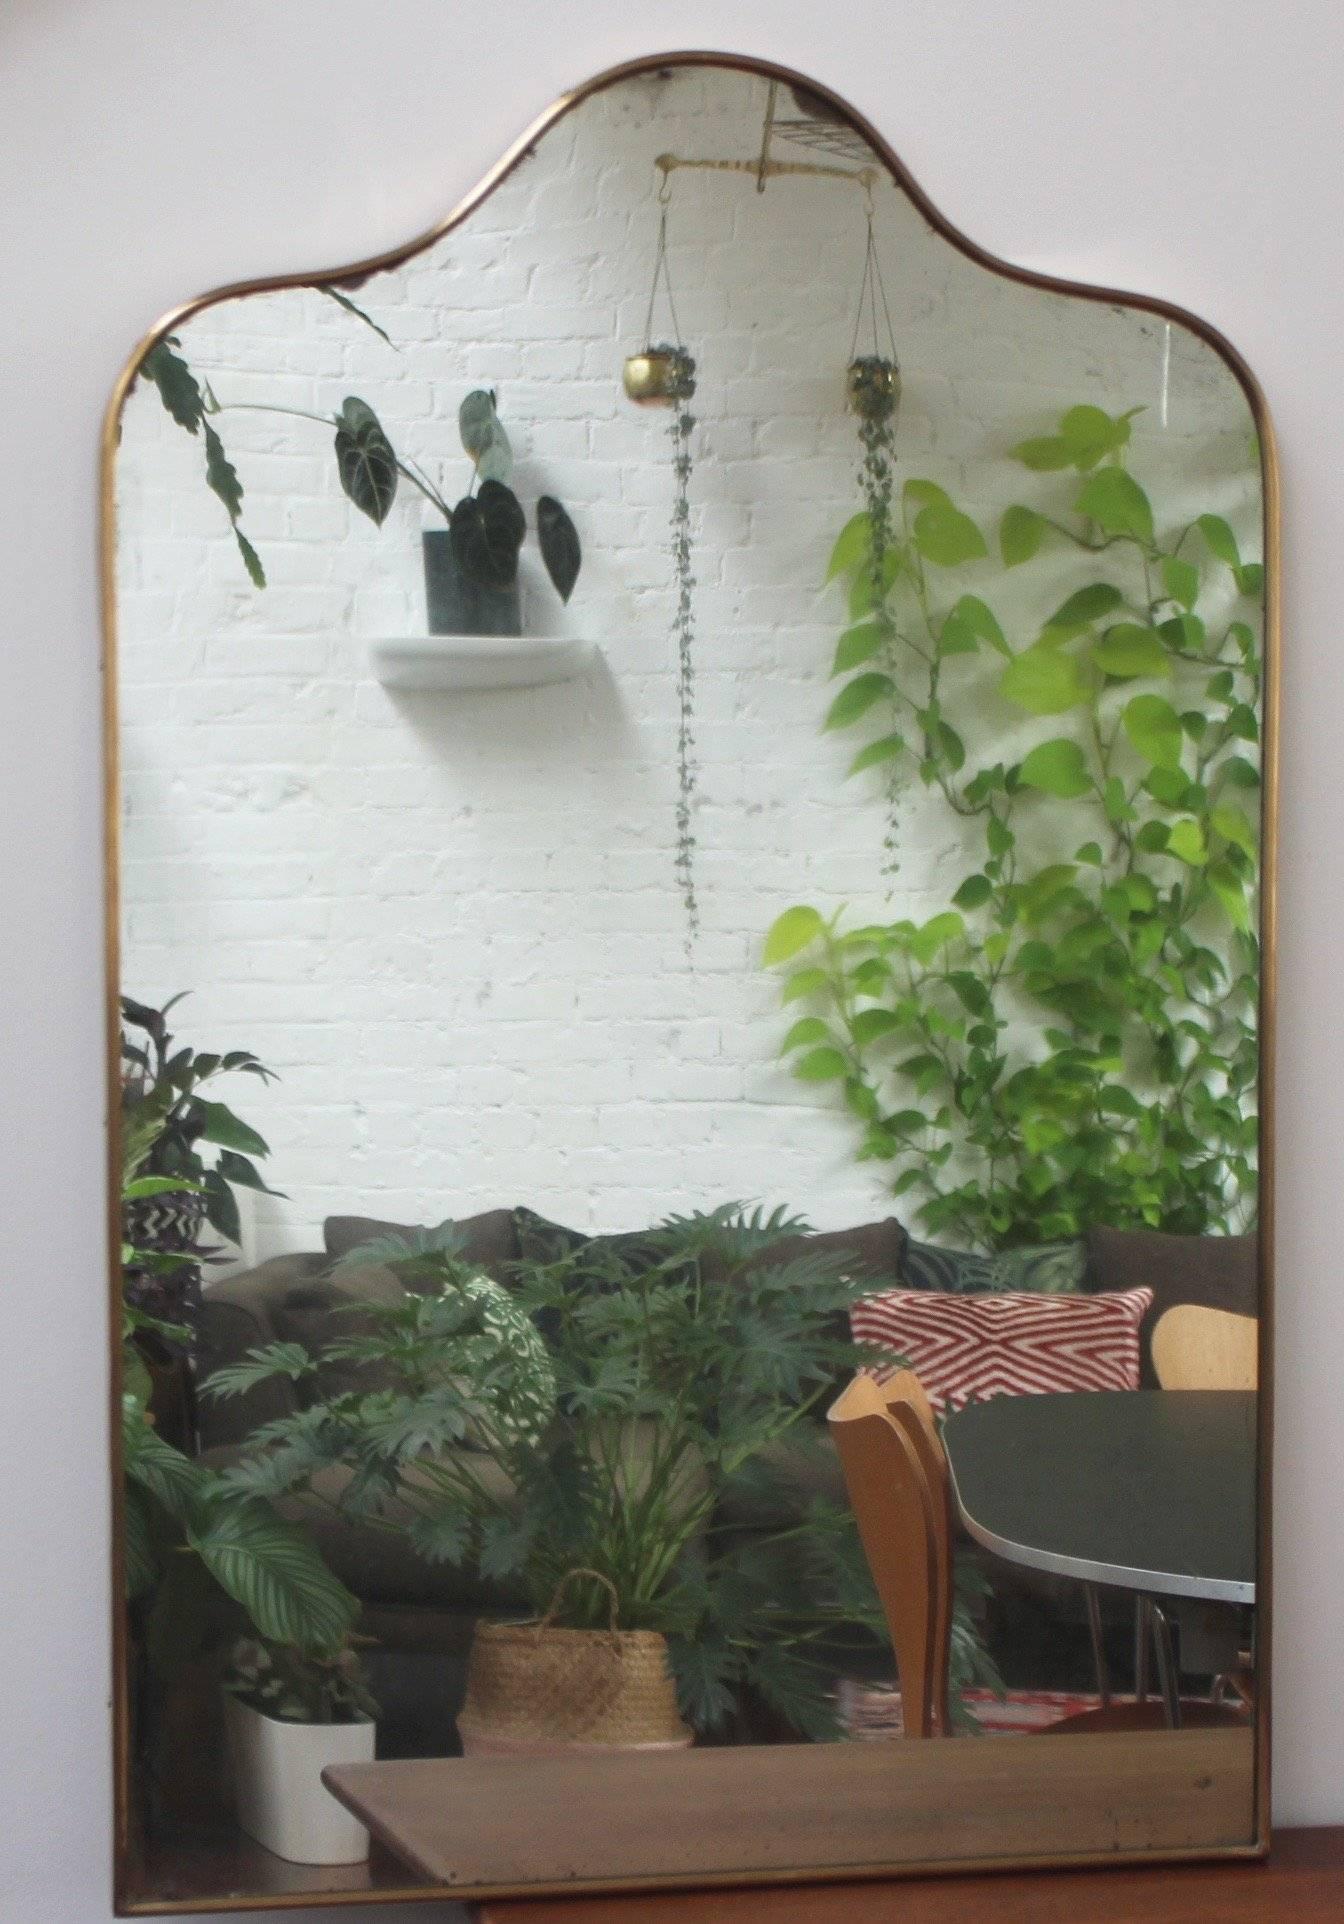 Mid-Century Italian wall mirror with brass frame, 1950s. This mirror is simply elegant and characterful in a modern Gio Ponti style. The mirror is in overall good condition with a new fitted backing. There are some evident black spots and blemishes